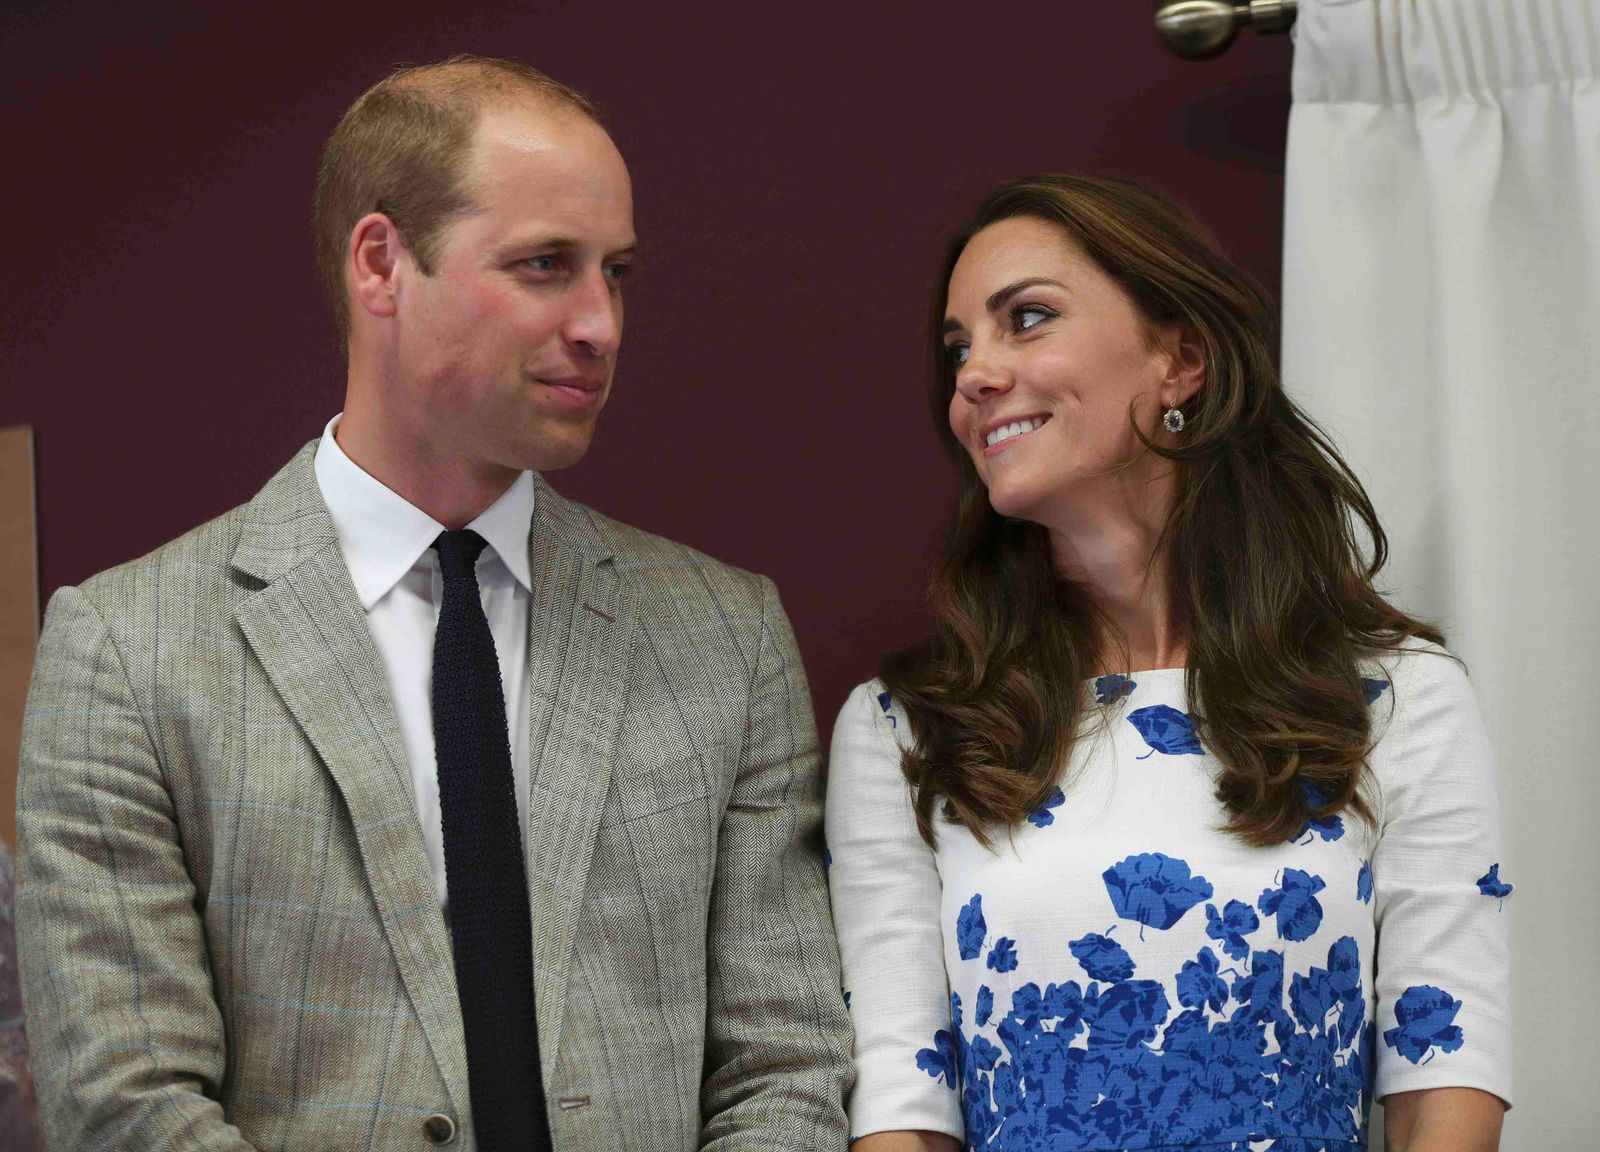 Kate Middleton and Prince William listening to a speech during their visit to Keech Hospice Care on August 24, 2016 in Luton, England | Photo: Getty Images